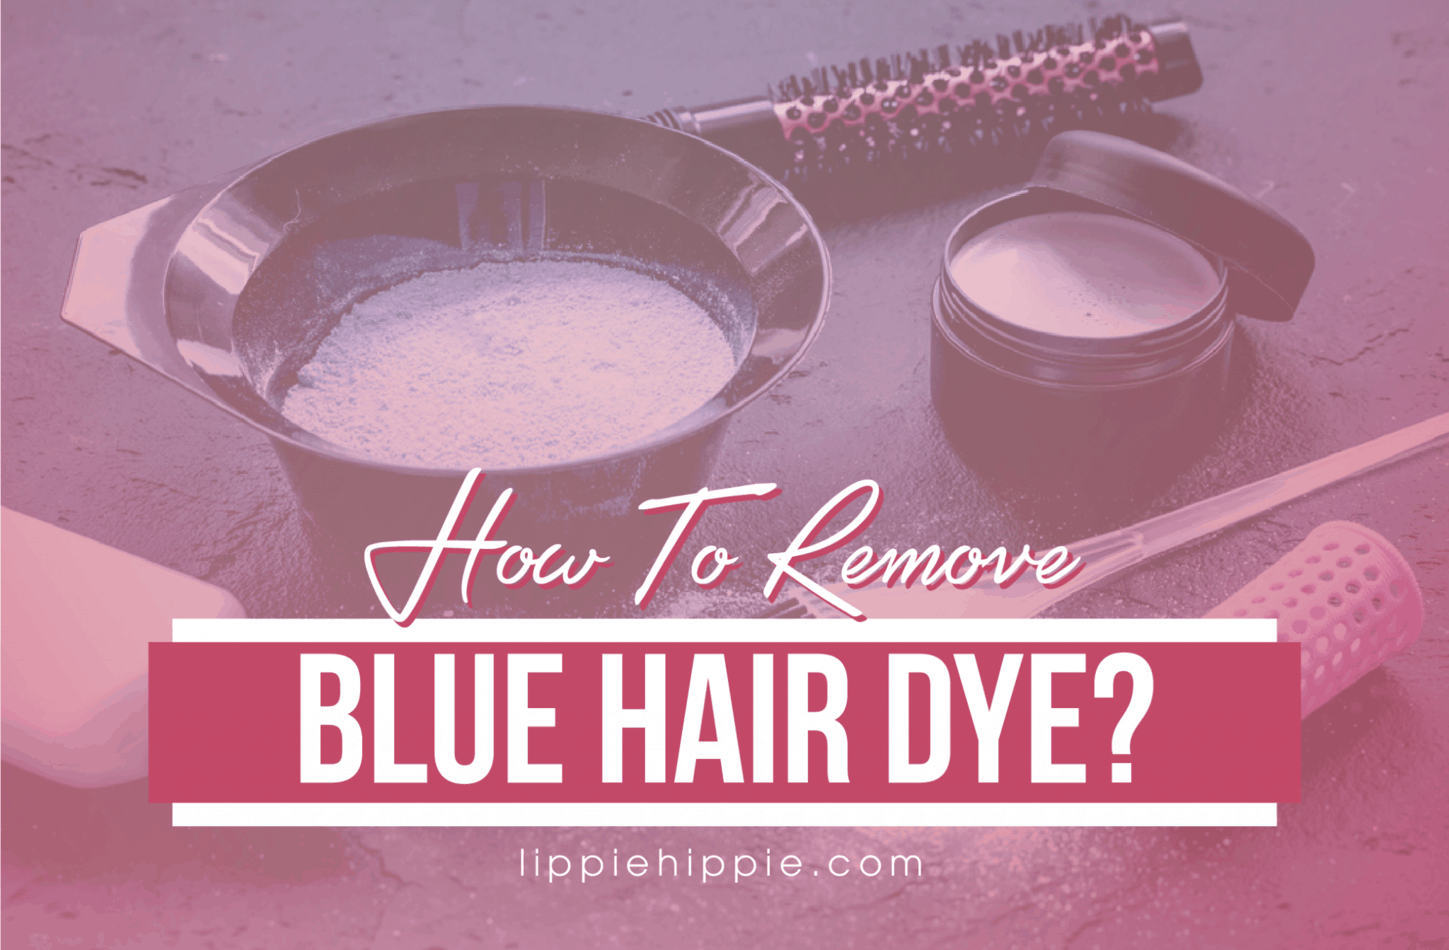 1. How to Remove Blue Hair Dye - wide 5